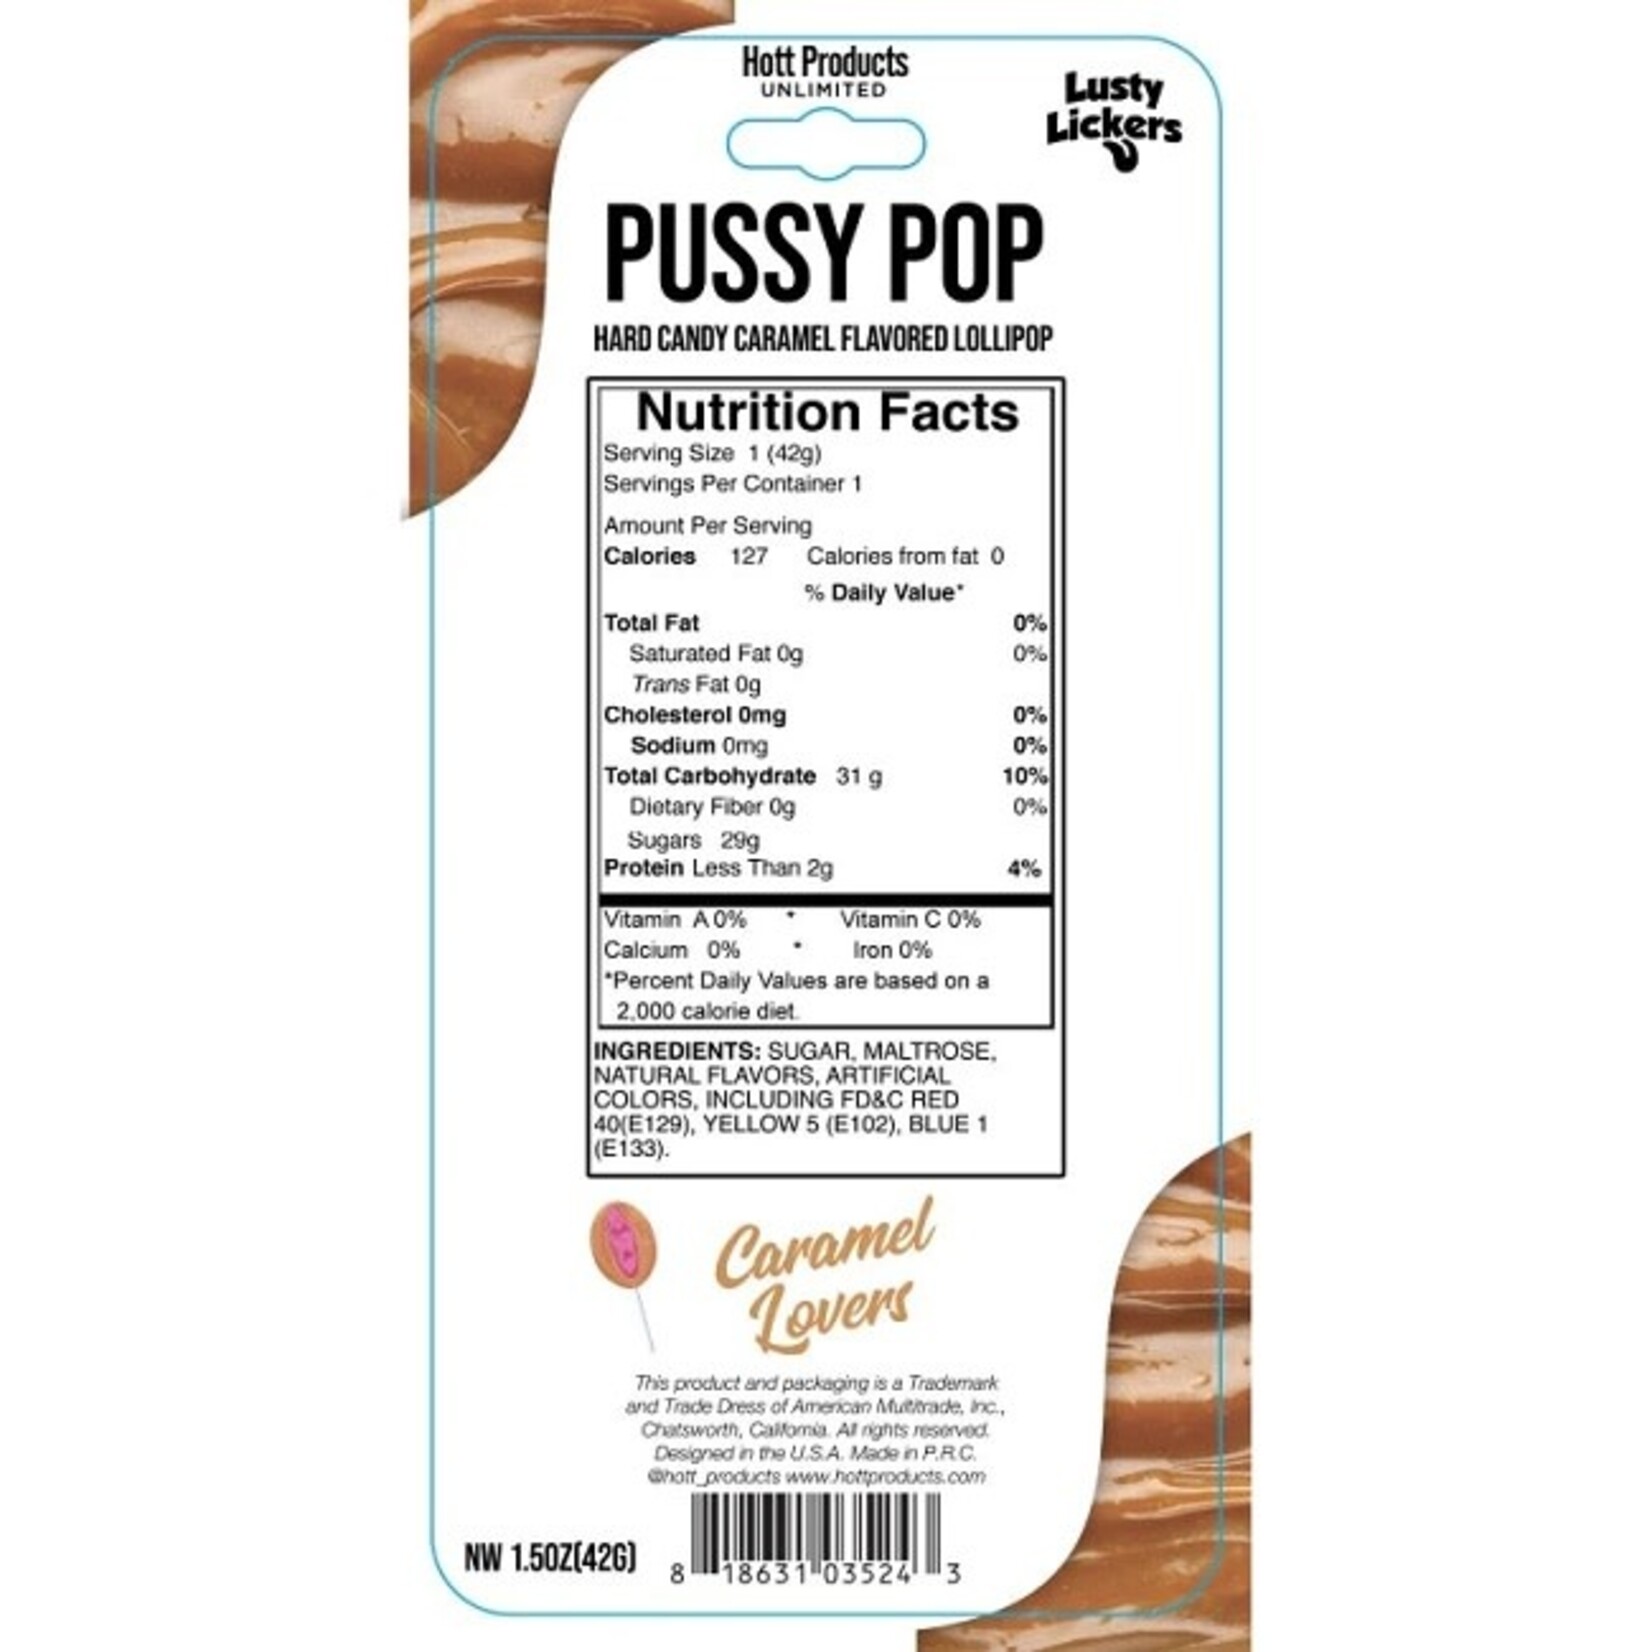 Hott Products Lusty Lickers Pussy Lickers Caramel Lovers